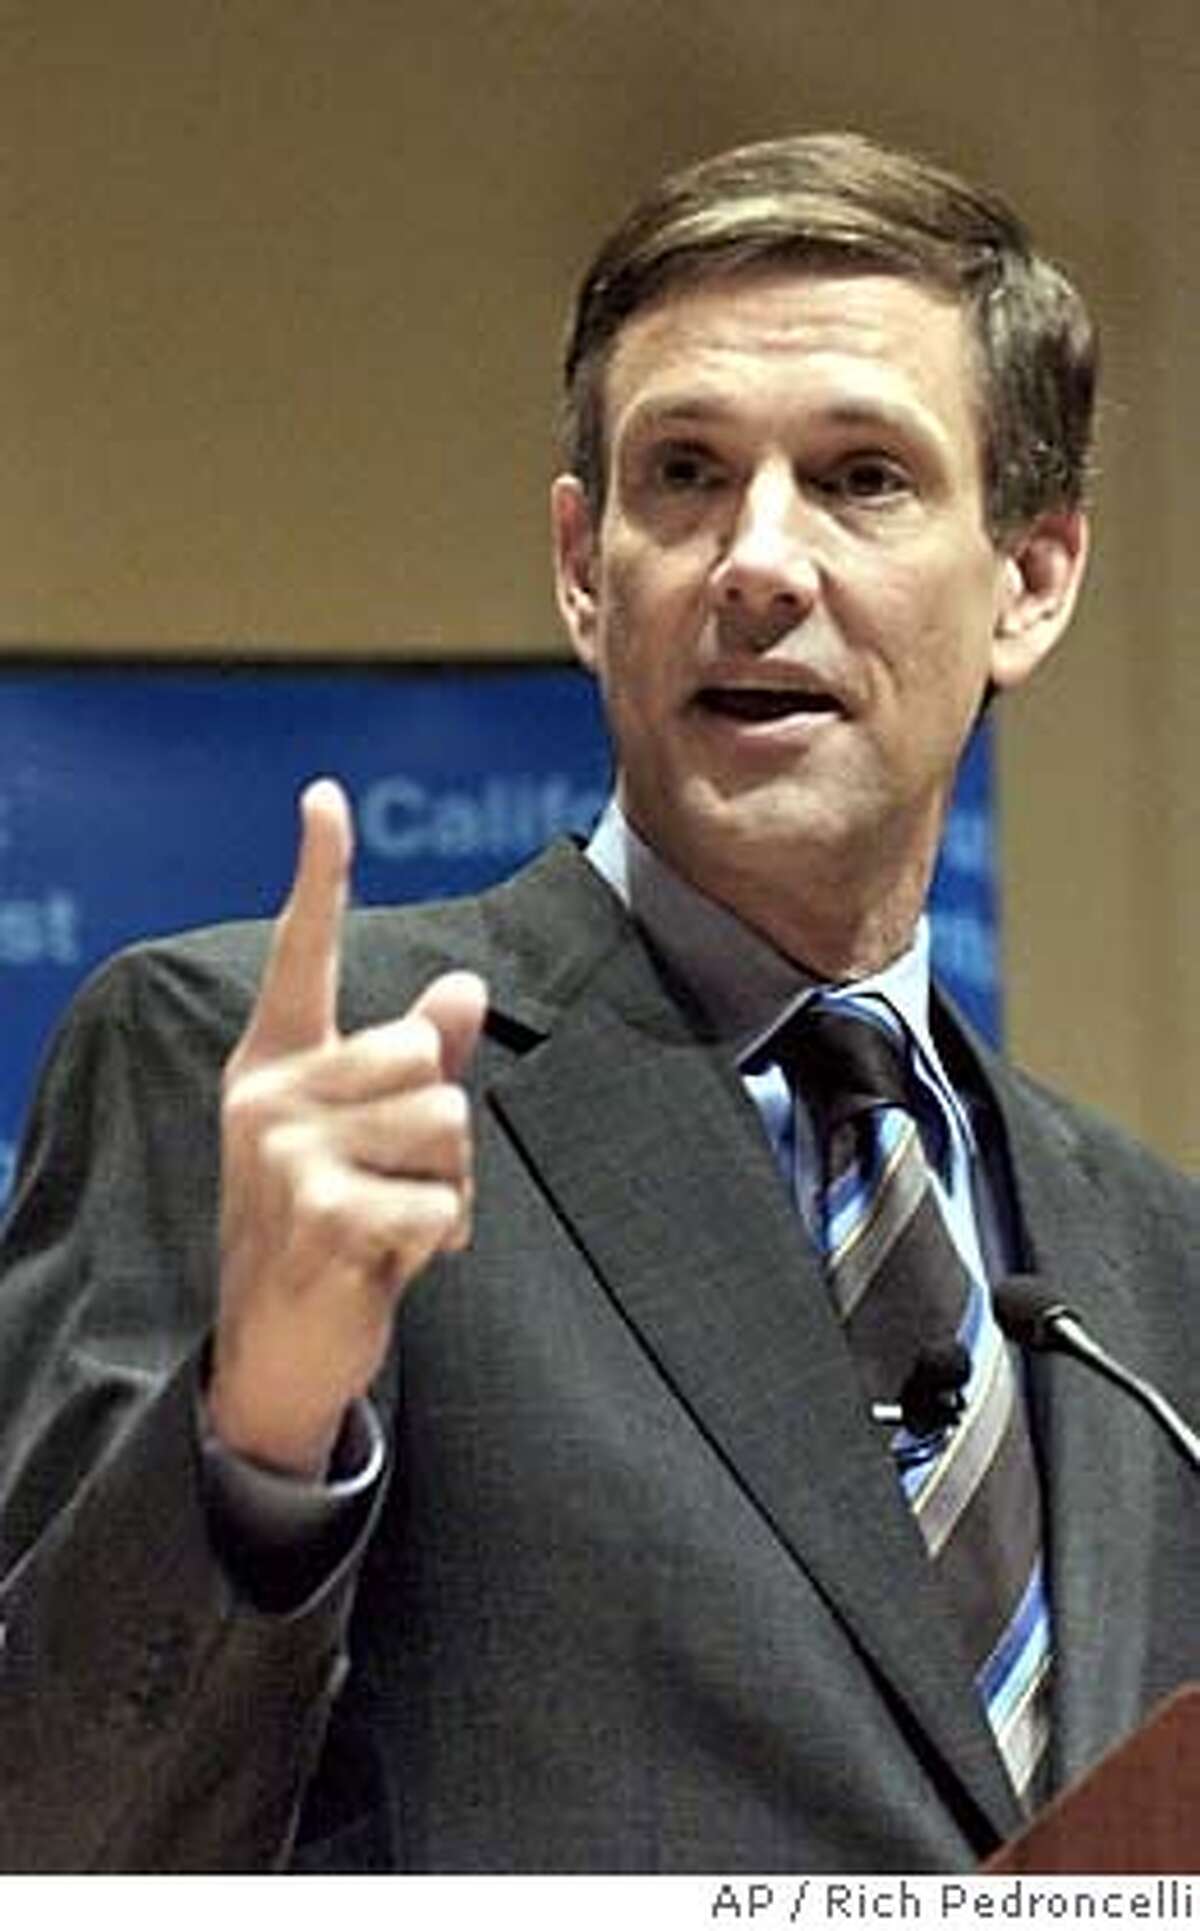 State schools chief Jack O'Connell gestures while giving his State of Education speech in Sacramento, Calif., Monday, Jan. 24, 2005. O'Connell said funding for public education is "bottoming out" and said he will focus on increasing state money for schools. (AP Photo/Rich Pedroncelli) Ran on: 01-25-2005 Jack OConnell